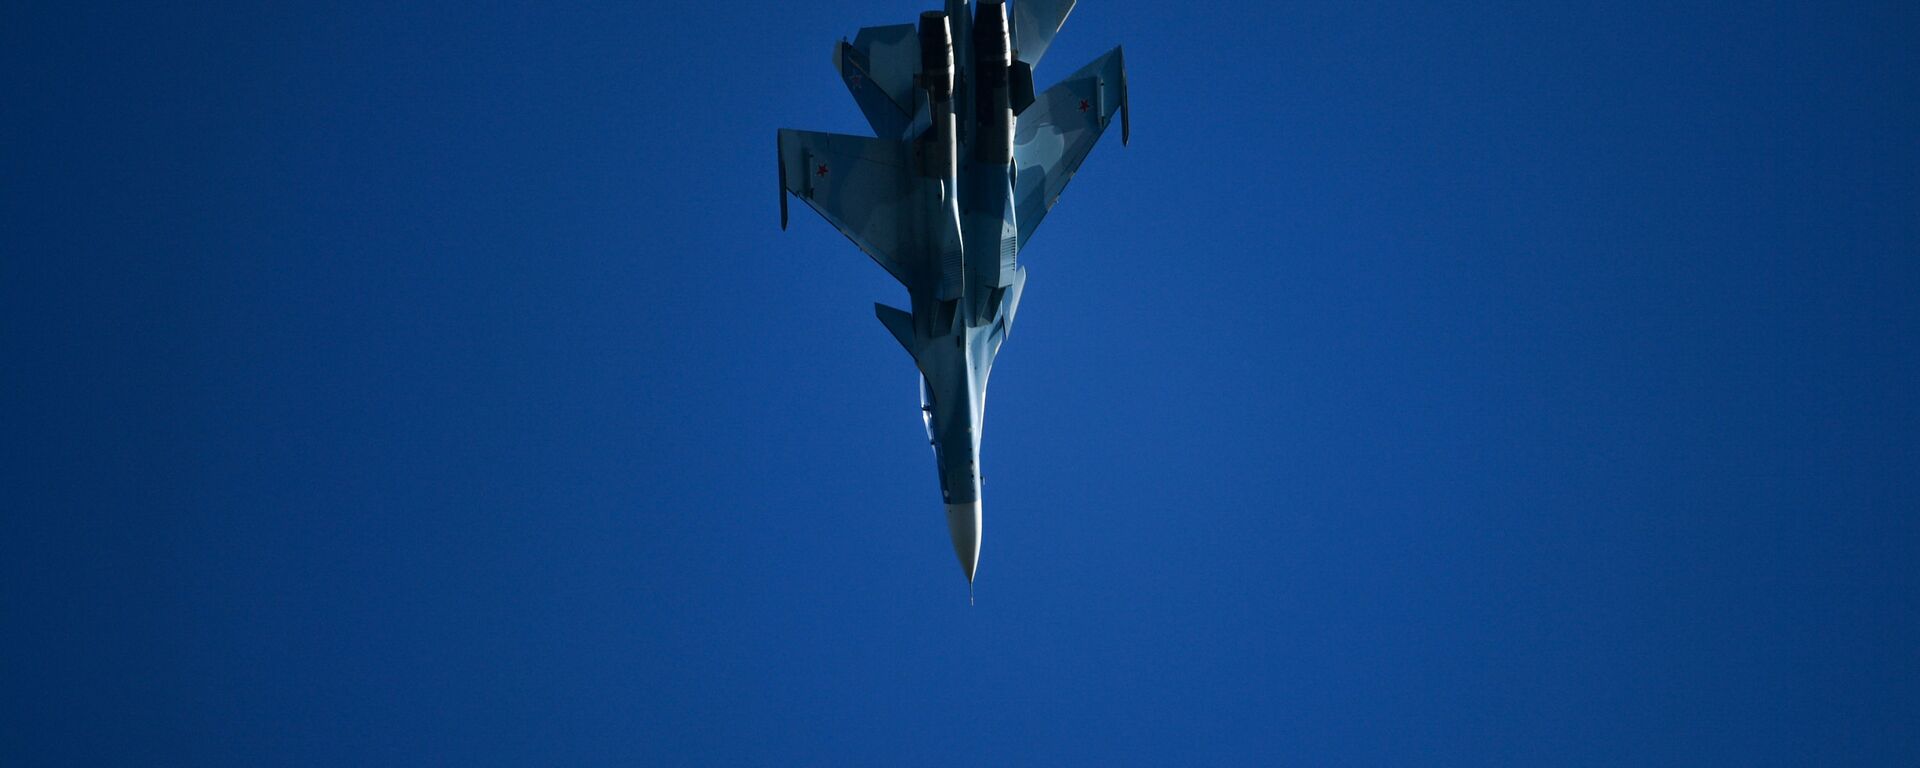 A Sukhoi Su-30SM fighter performs at the MAKS-2019 International Aviation and Space Show in Zhukovsky, outside Moscow, Russia. - Sputnik International, 1920, 07.10.2019